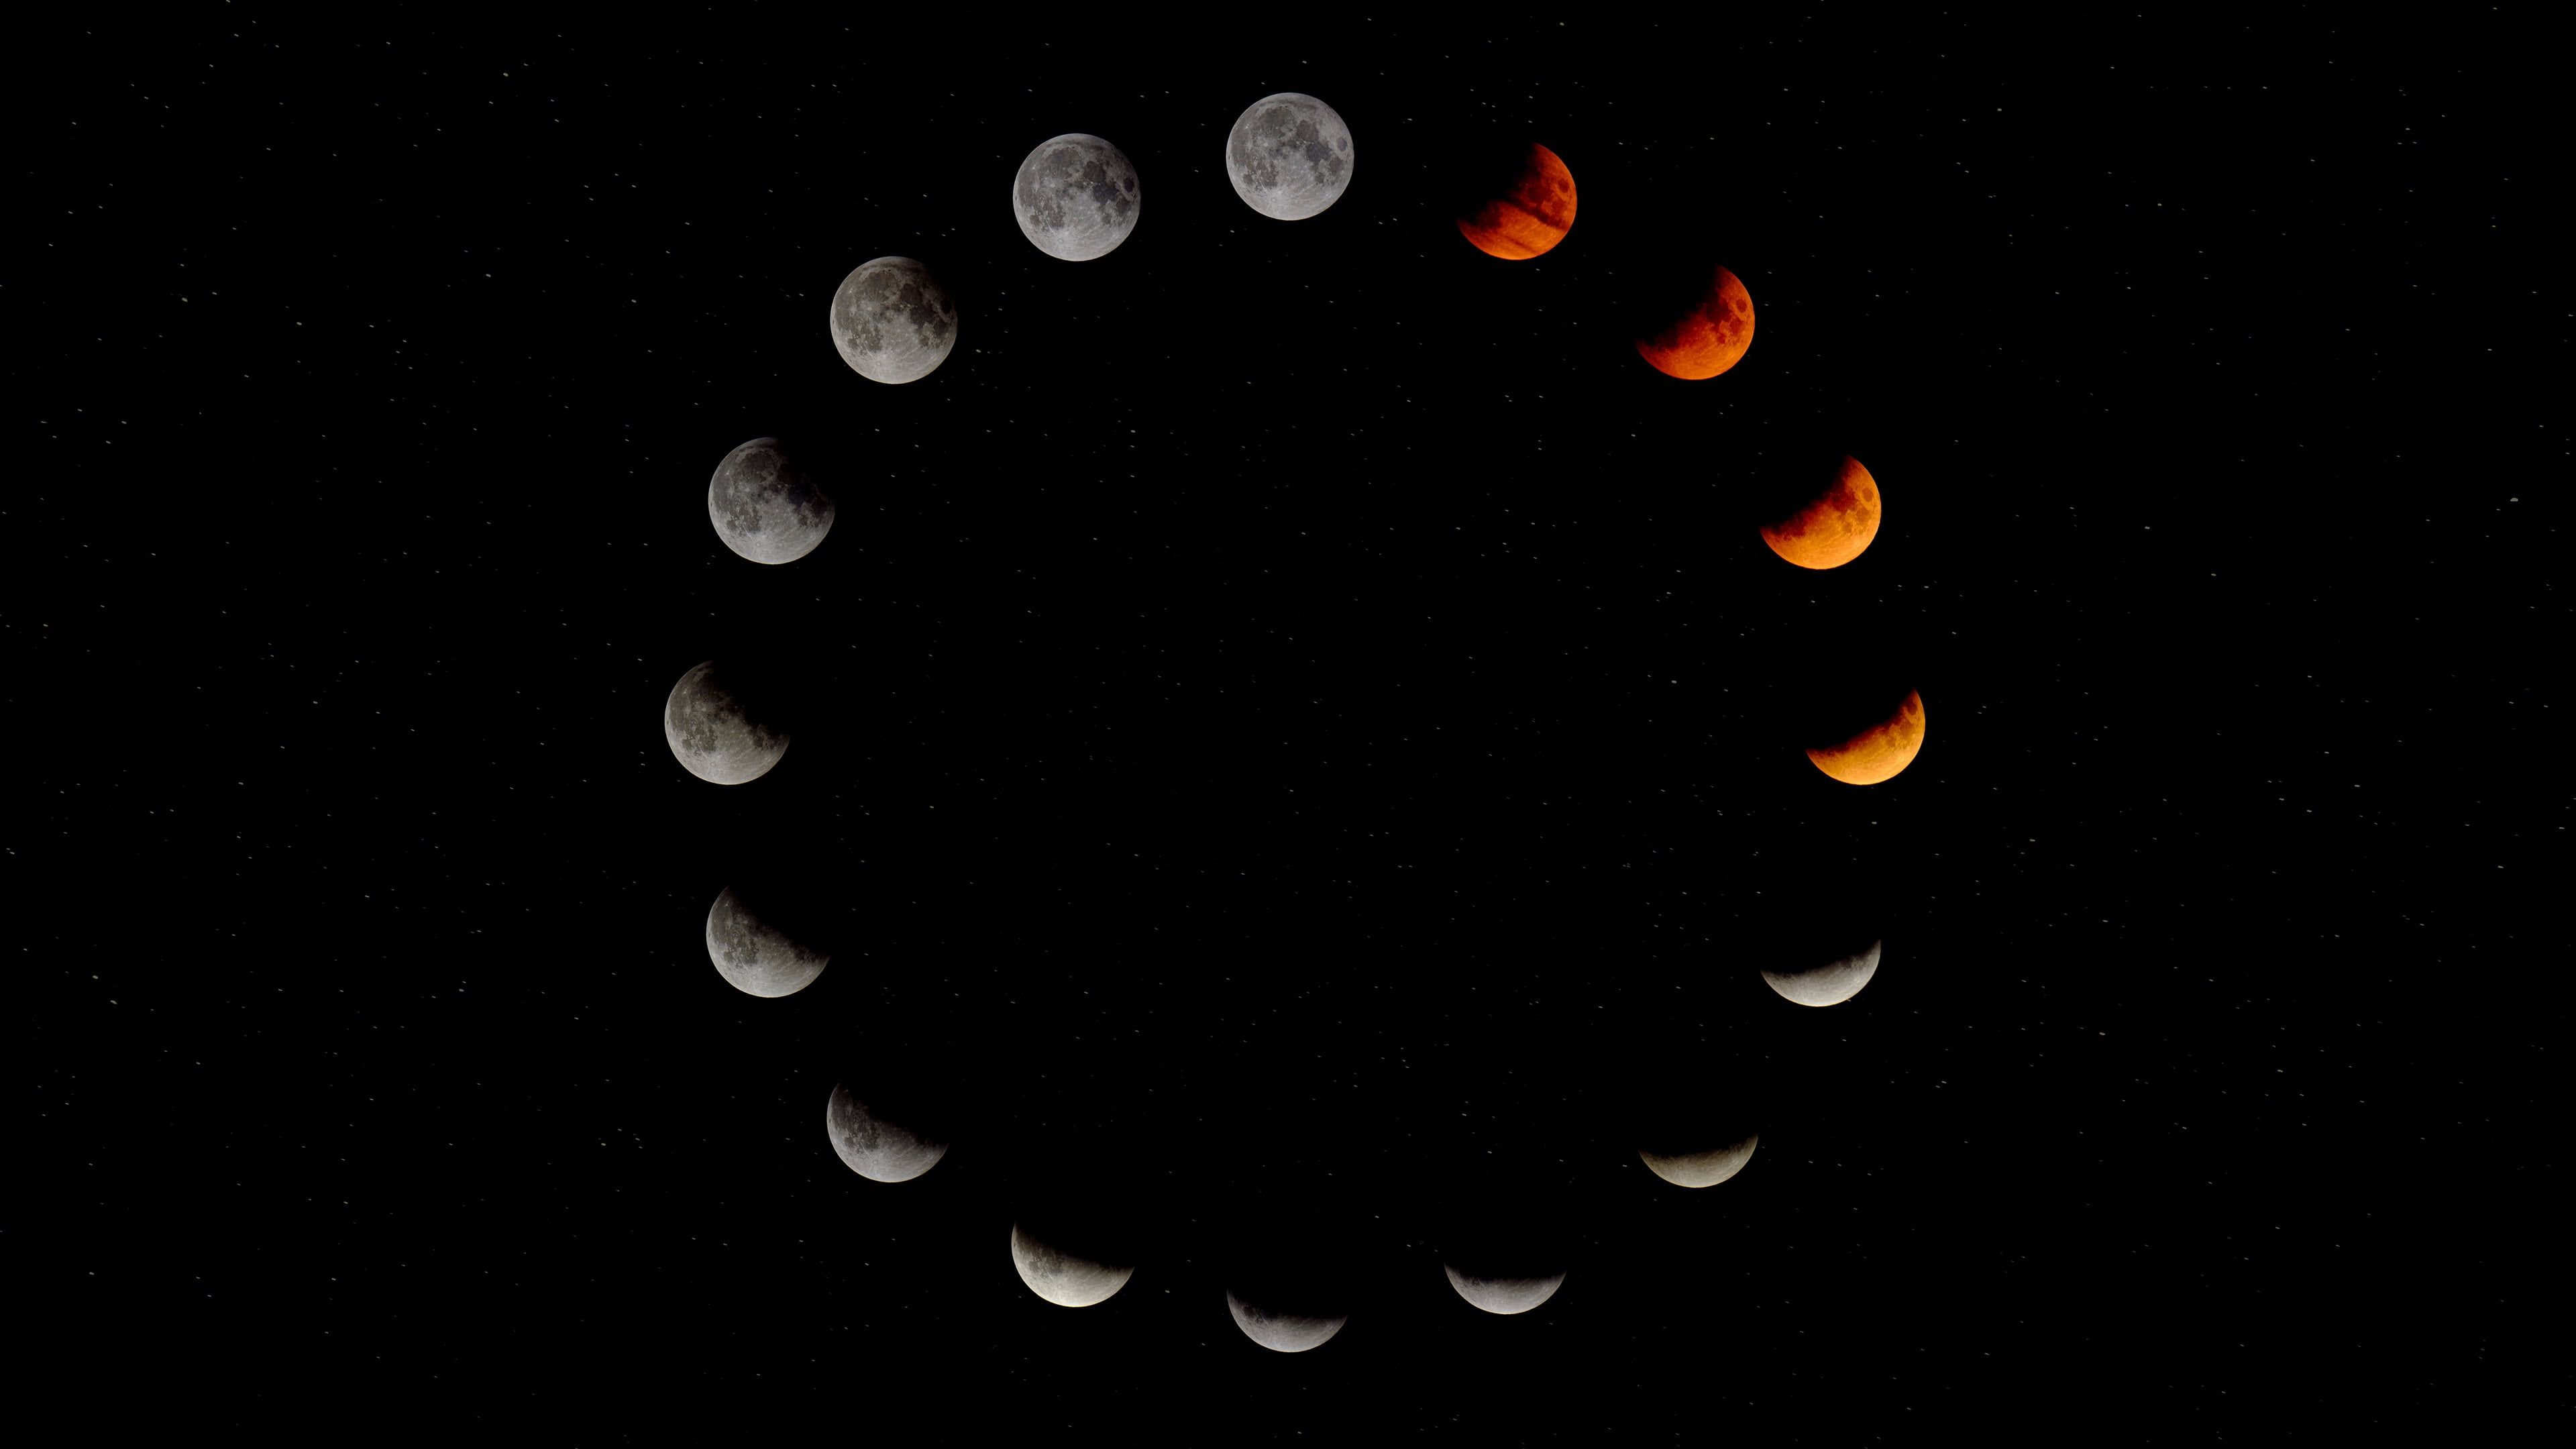 Moon #space #stars #circle Red moon moon phases K #wallpaper #hdwallpaper #desktop. Red moon, Wallpaper, Moon phases